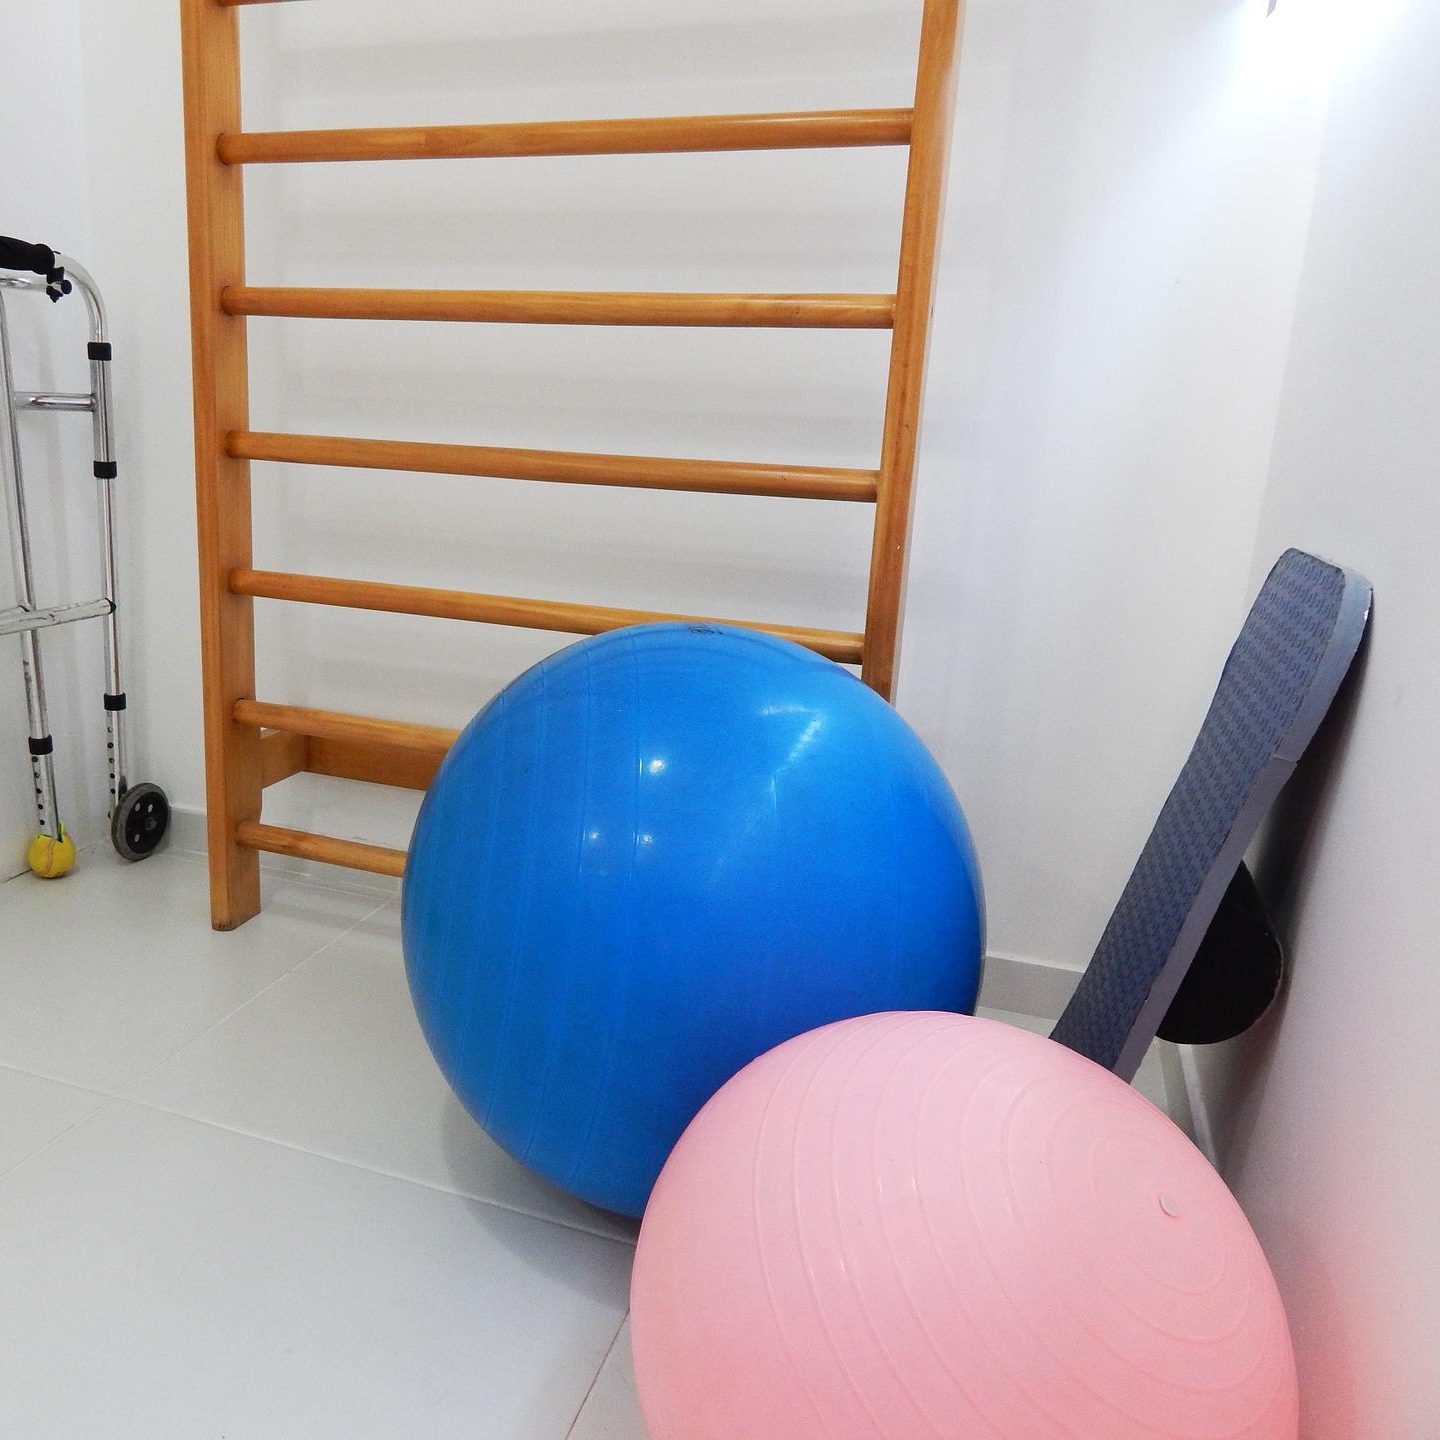 physiotherapy-gb862594d9_1920